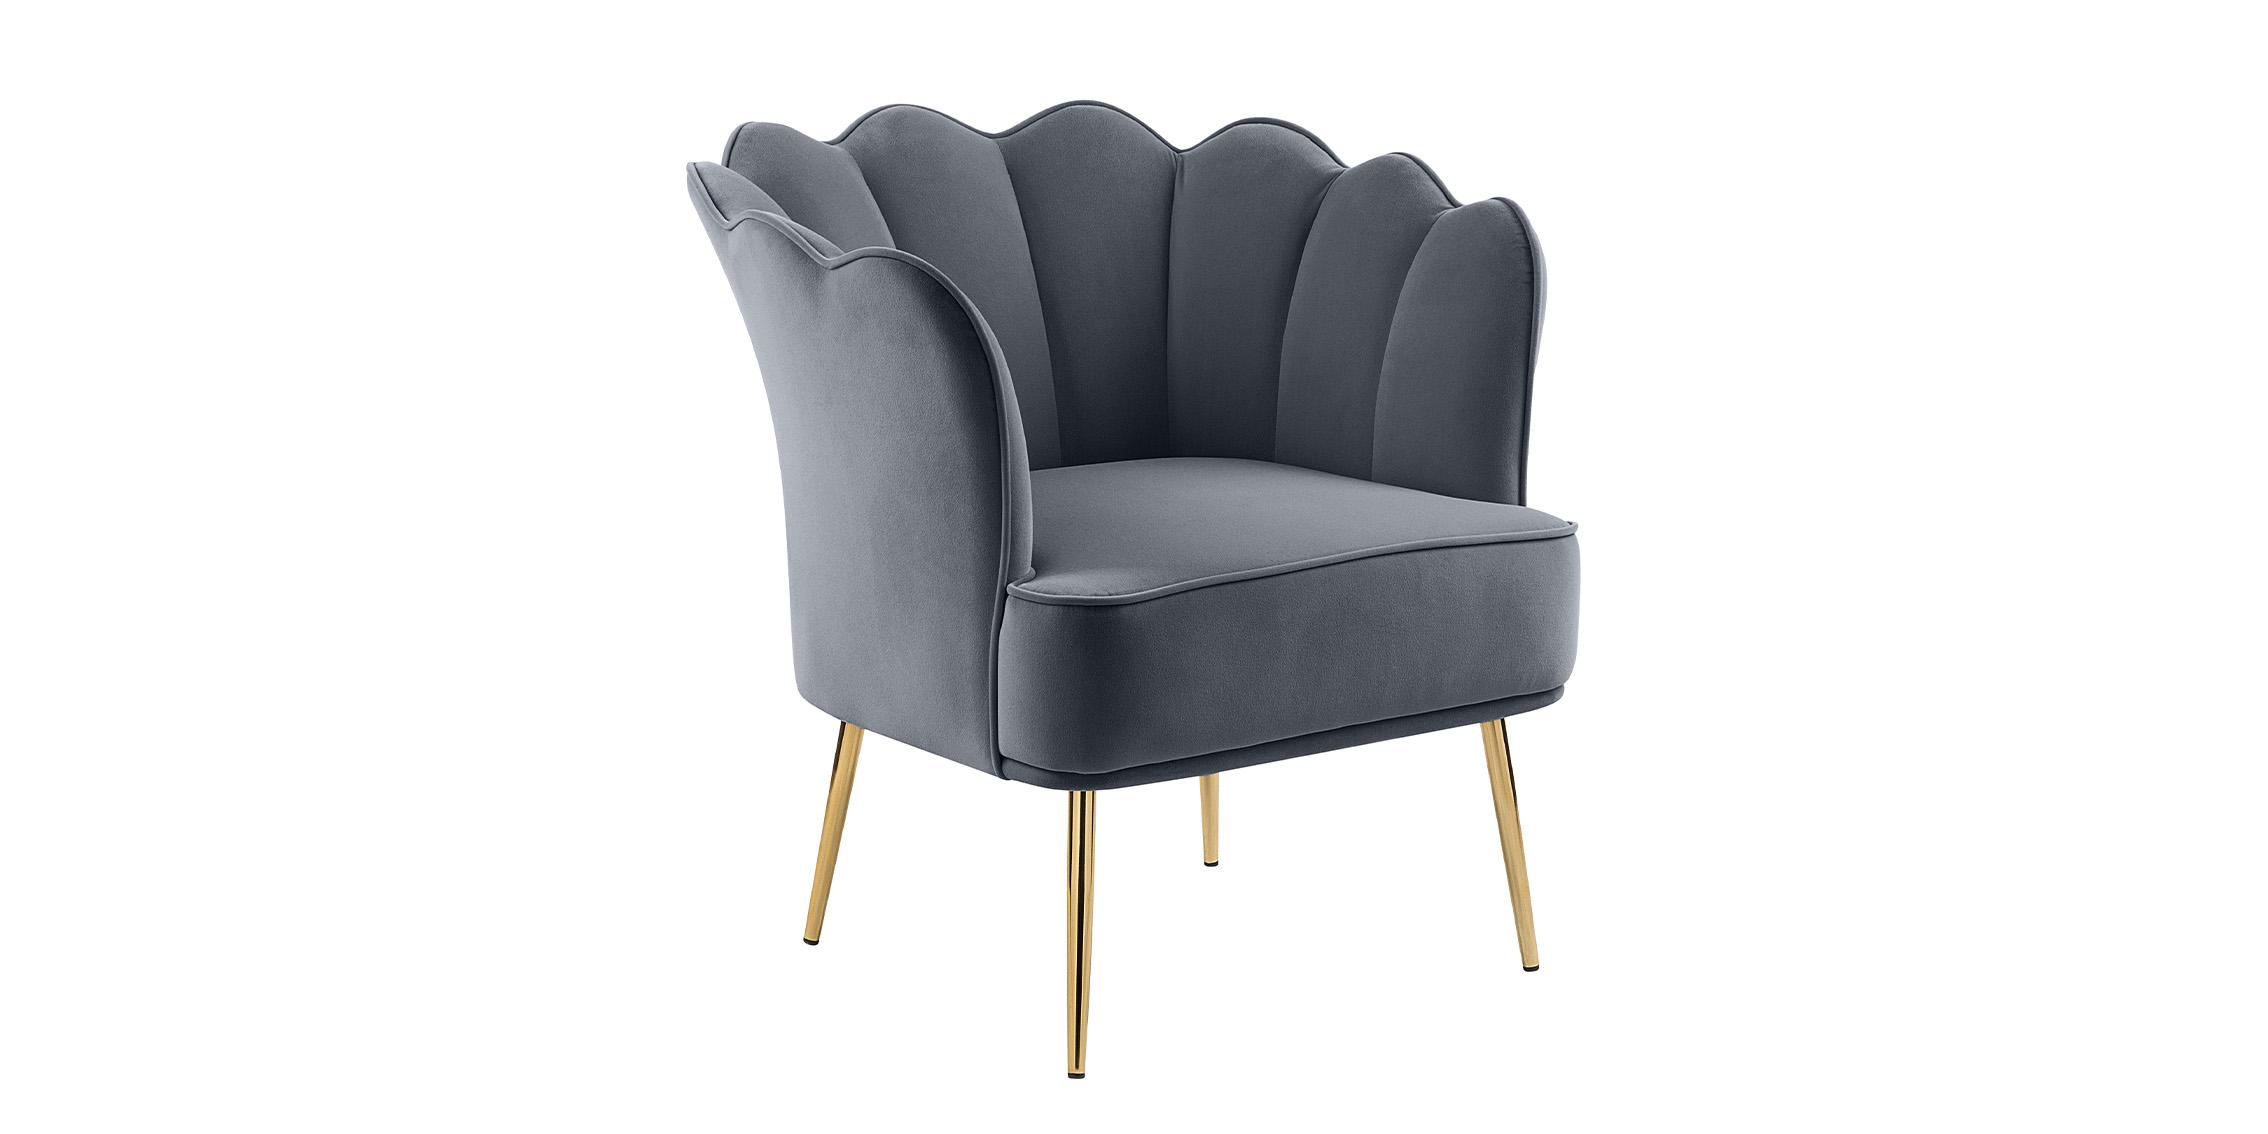 Contemporary, Modern Accent Chair JESTER 516Grey 516Grey in Gray, Gold Velvet